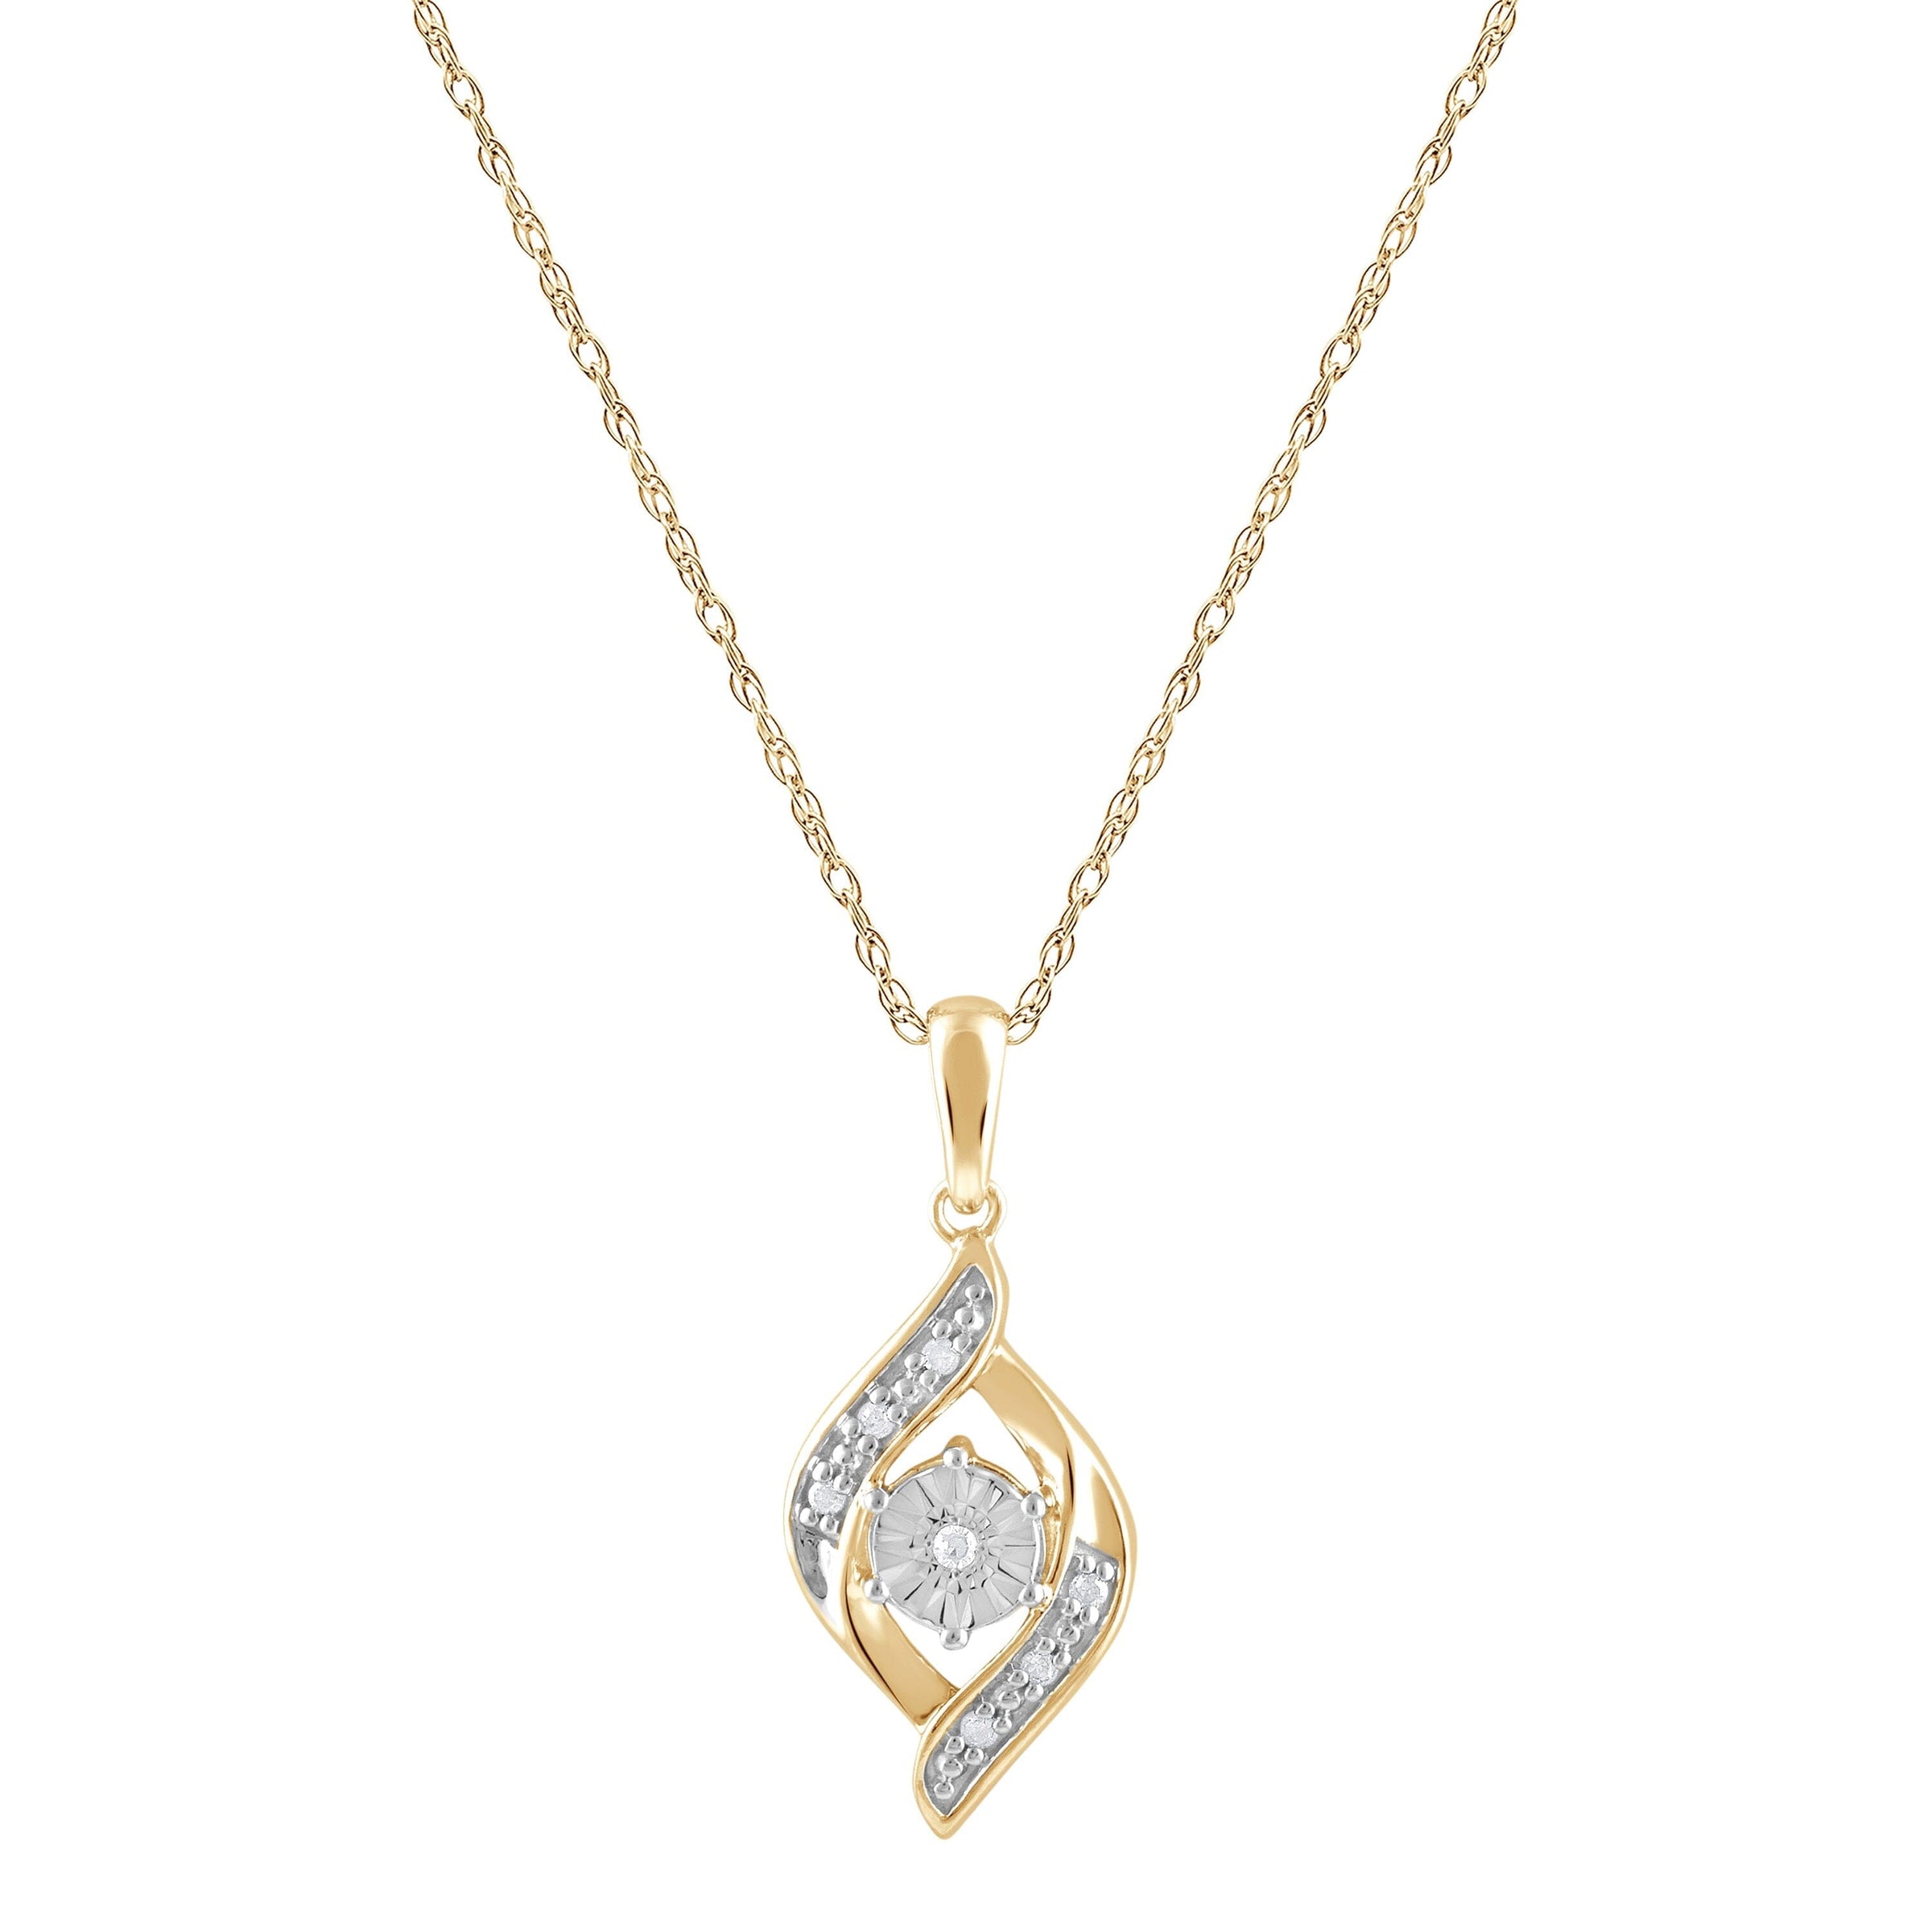 Flame Shaped Pendant Necklace with 0.03ct of Diamonds in 9ct Yellow Gold Plated Sterling Silver Necklaces Bevilles 